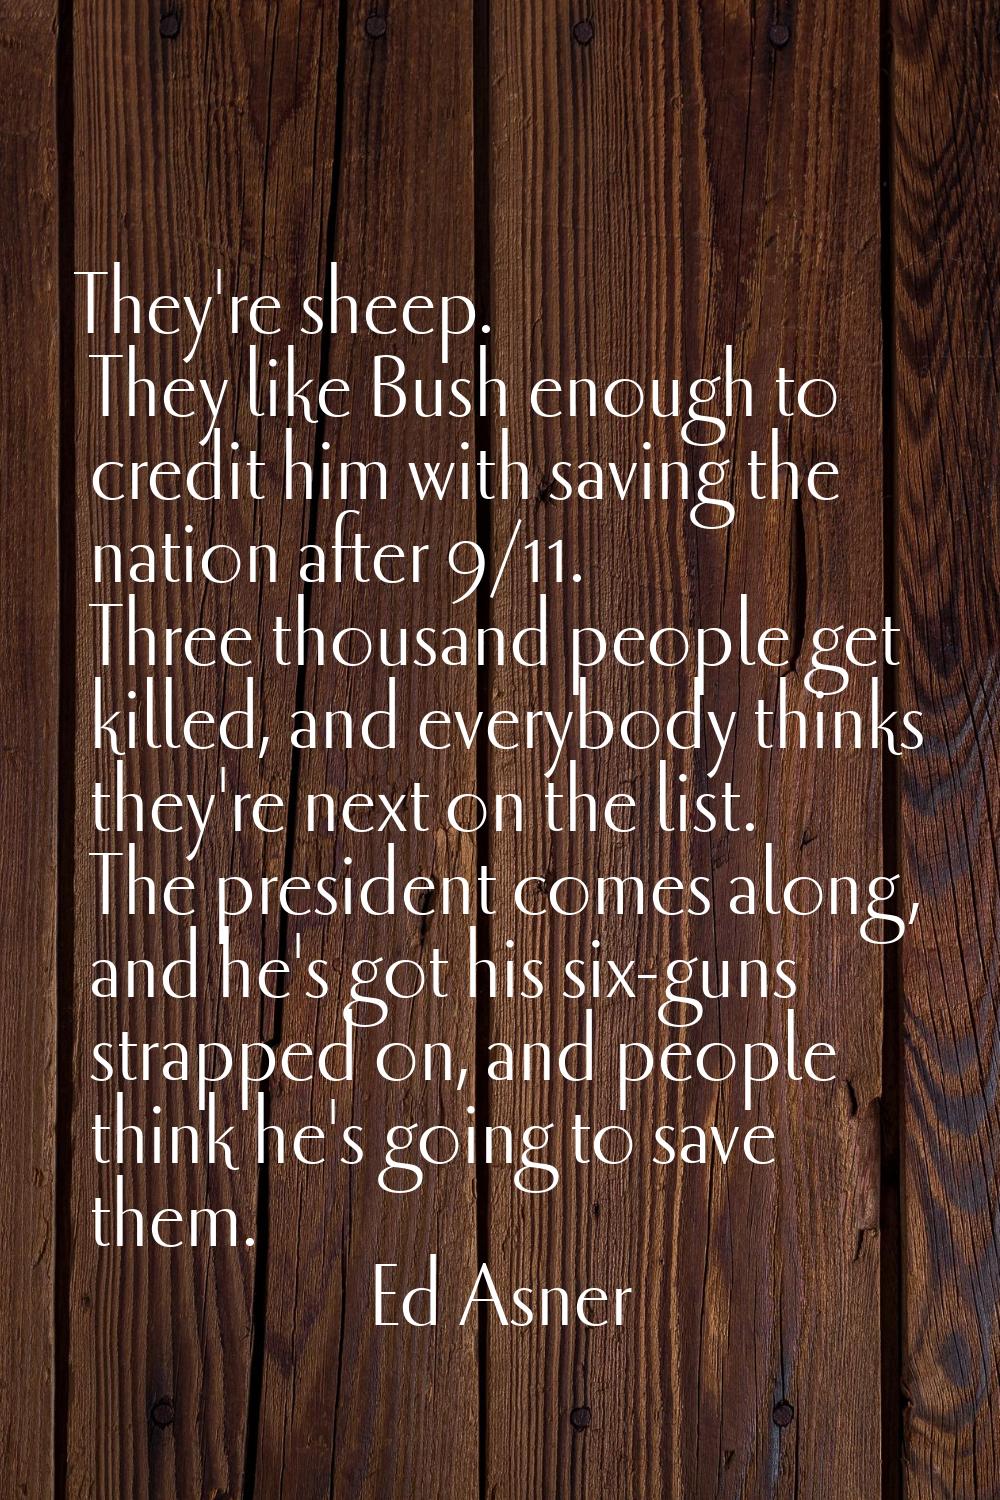 They're sheep. They like Bush enough to credit him with saving the nation after 9/11. Three thousan